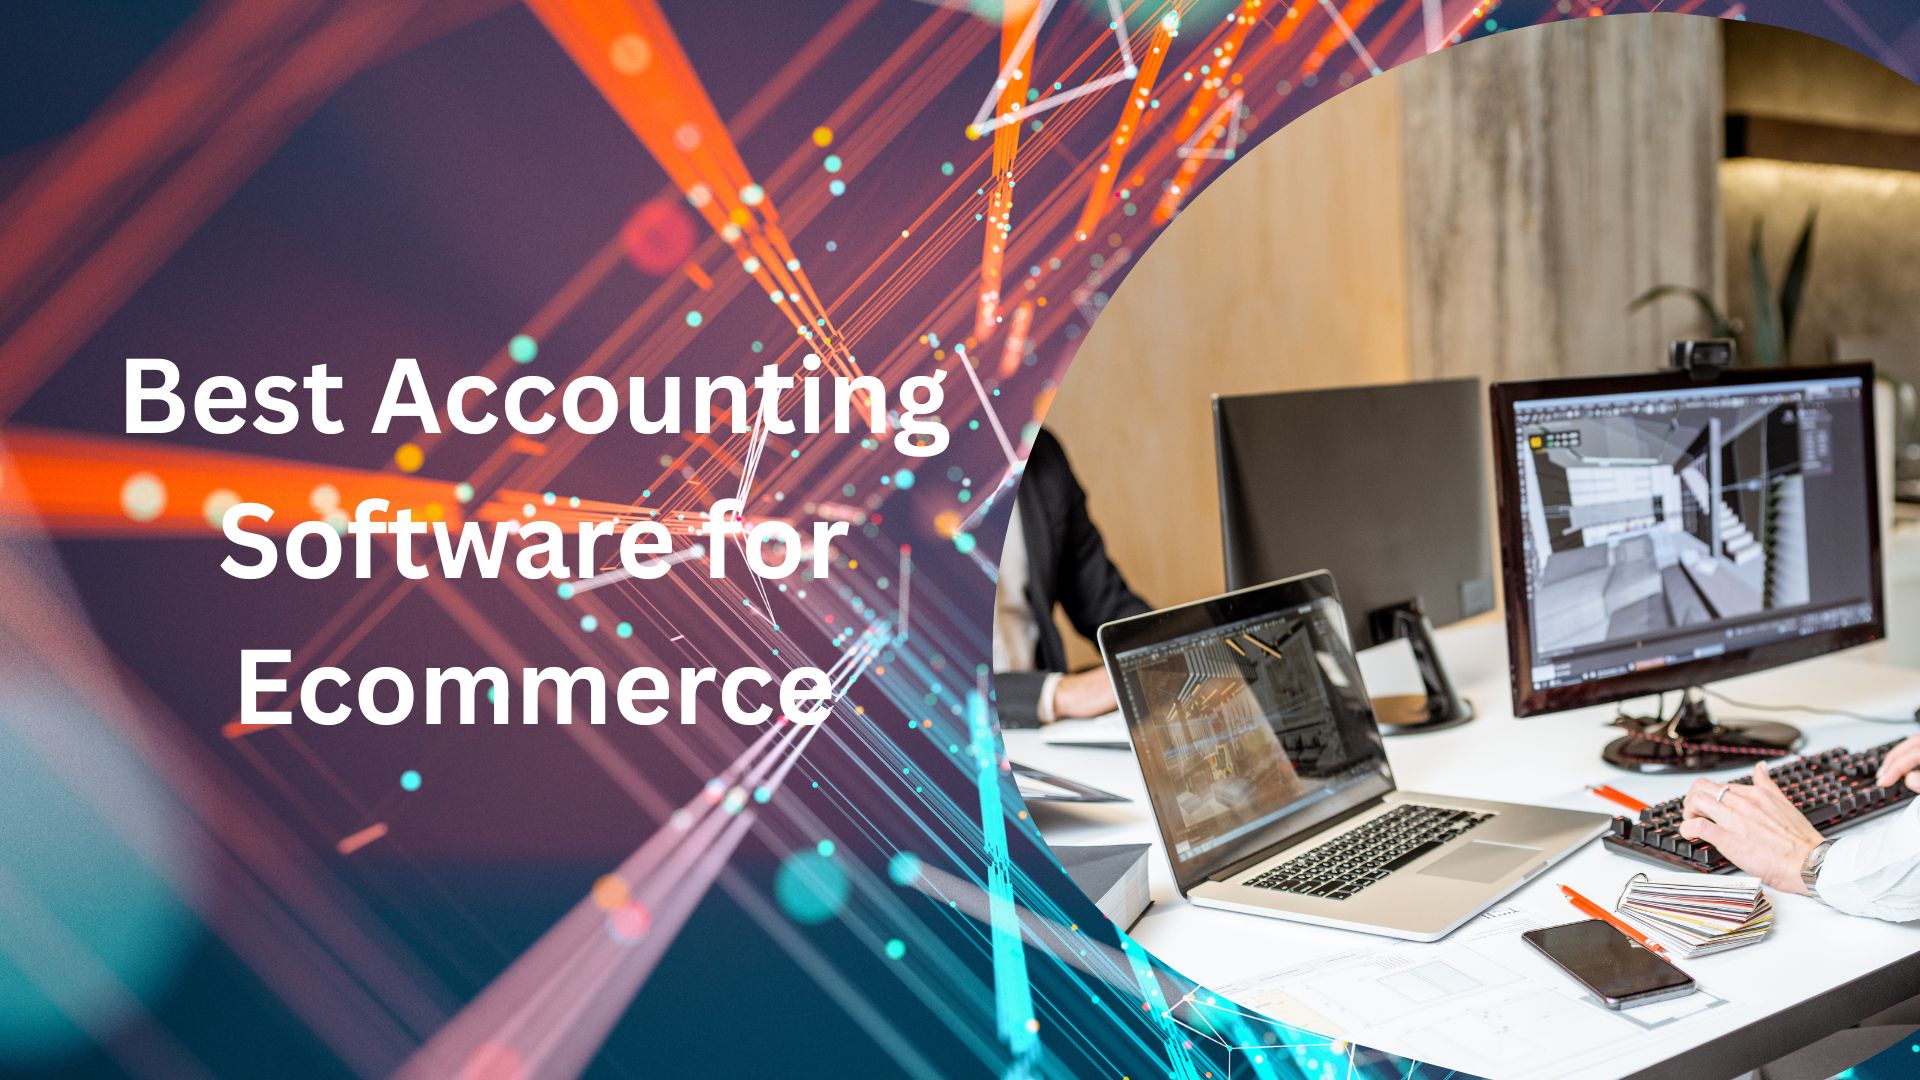 Best Accounting Software for Ecommerce